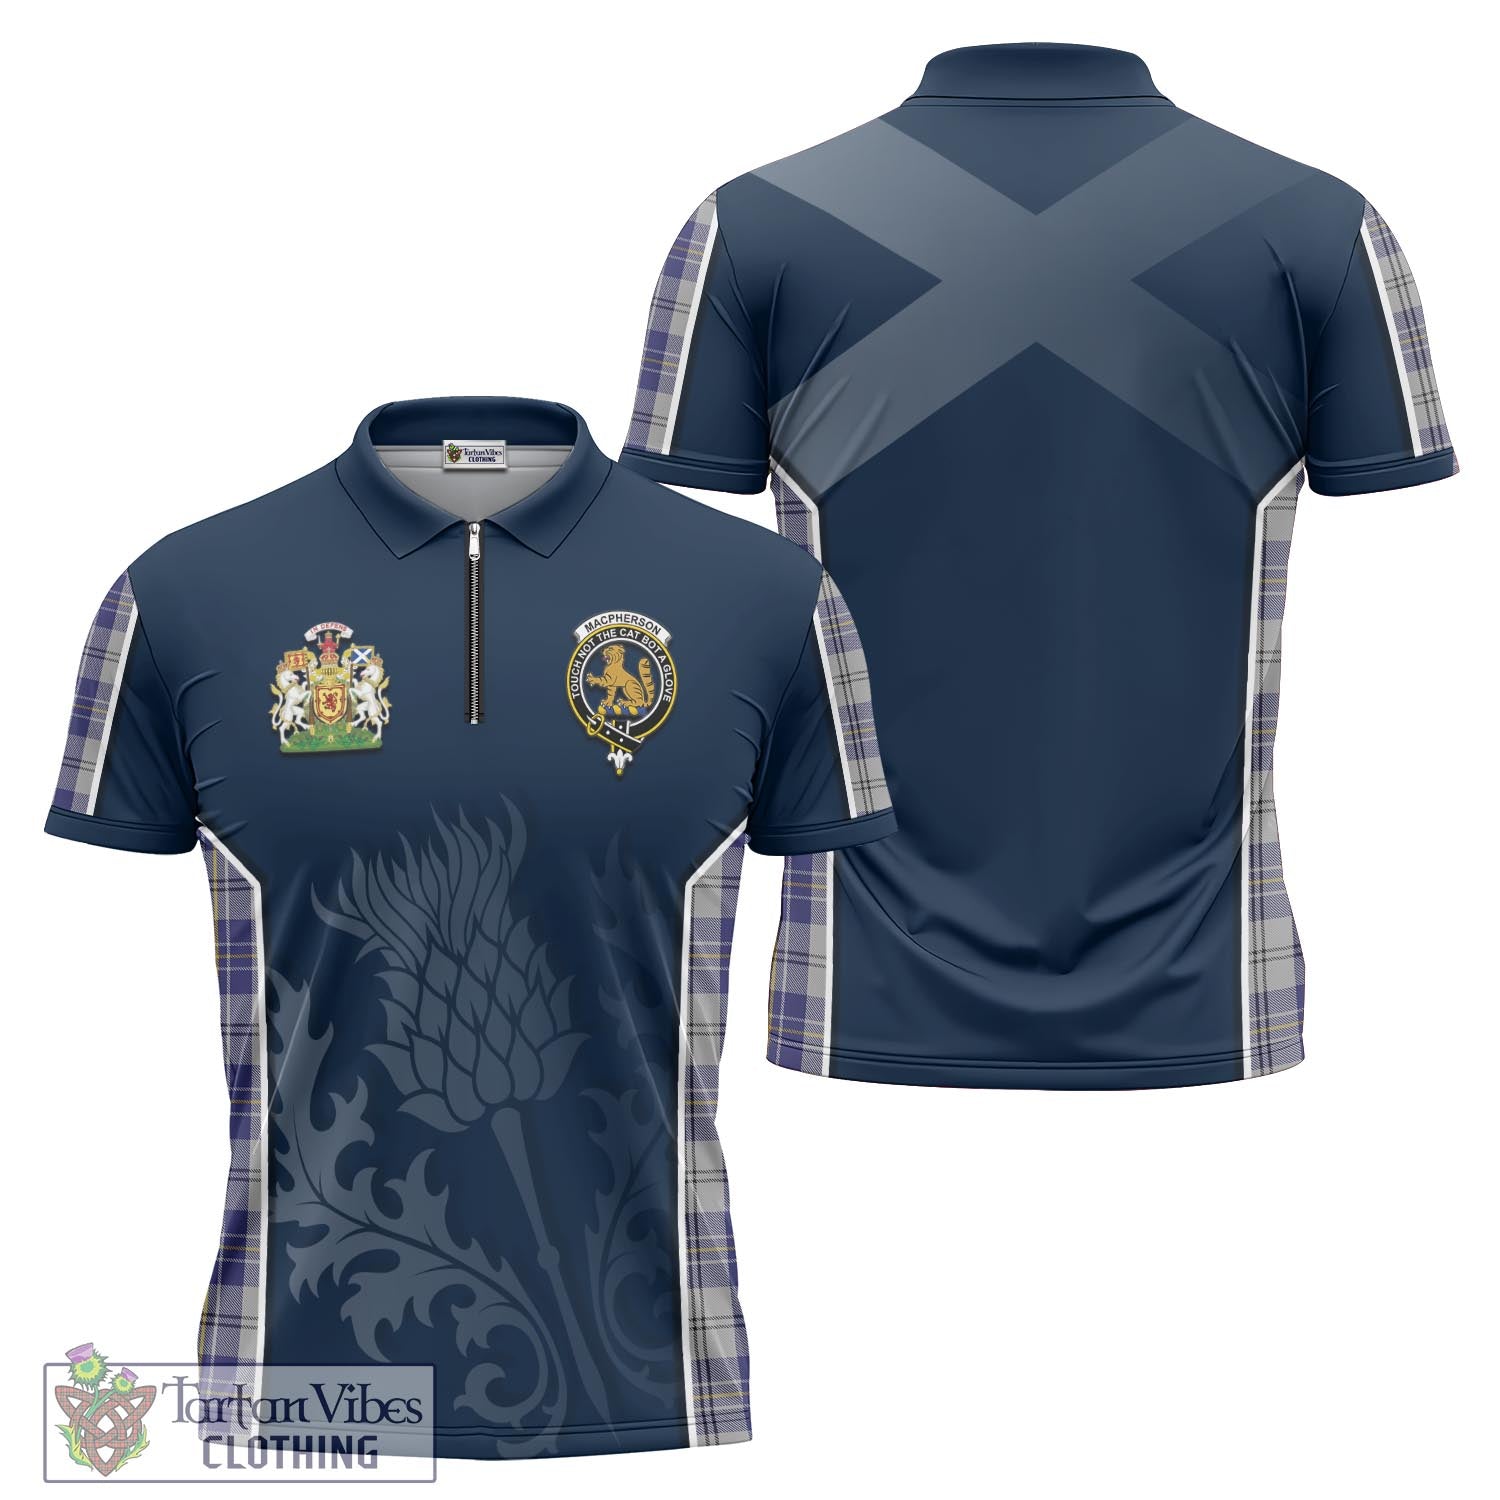 Tartan Vibes Clothing MacPherson Dress Blue Tartan Zipper Polo Shirt with Family Crest and Scottish Thistle Vibes Sport Style